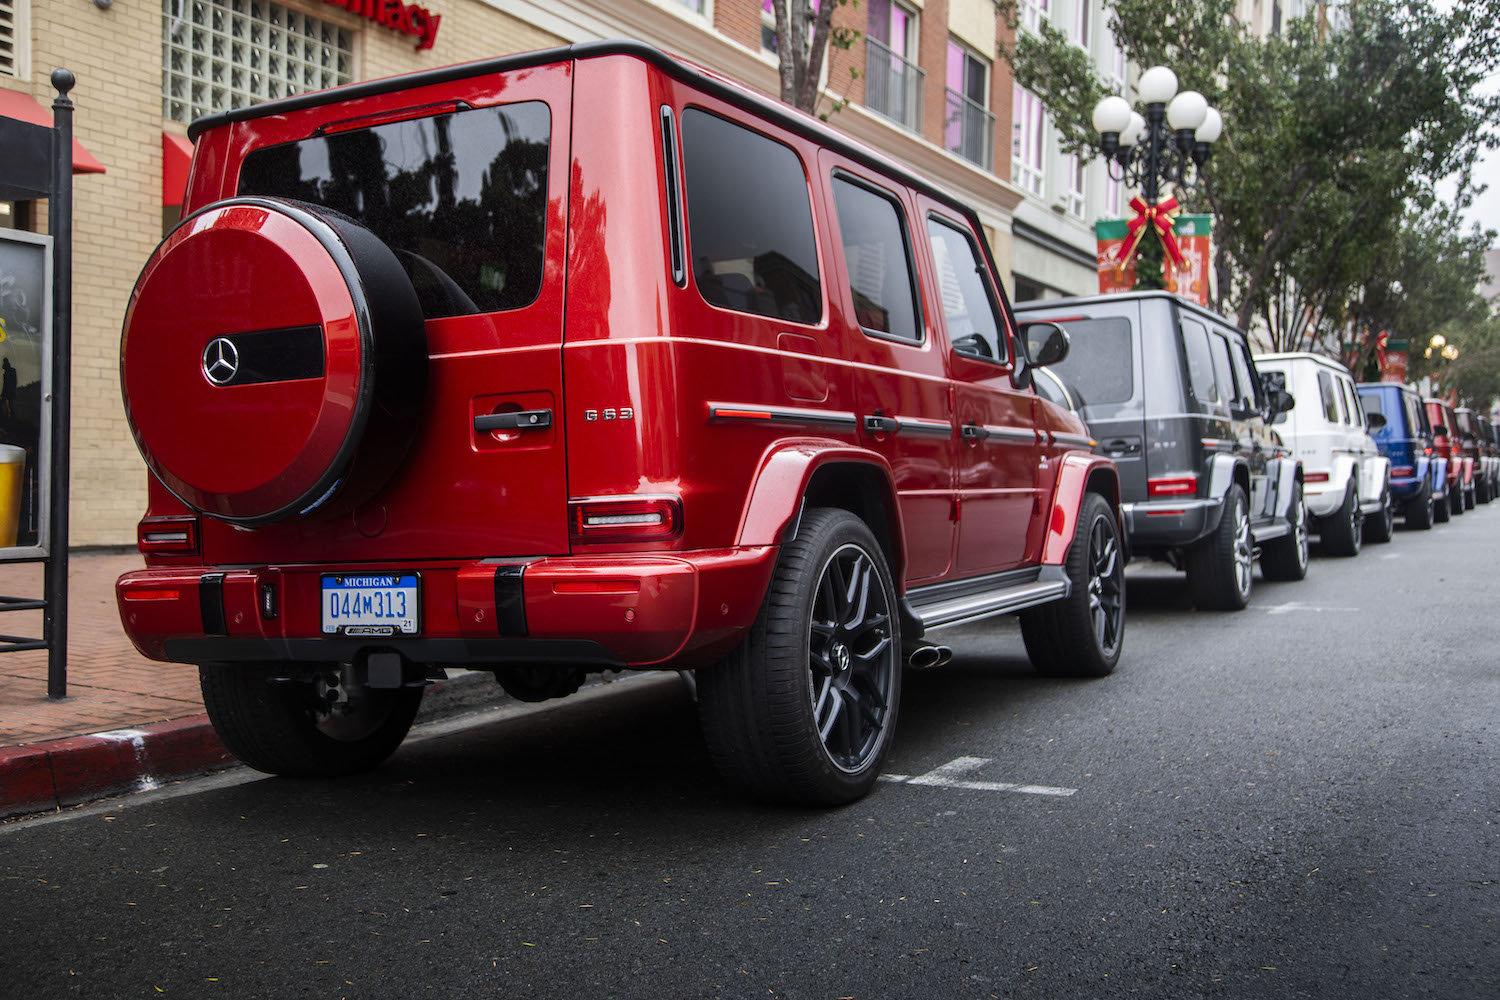 A row of 2019 Mercedes-Benz G550s parked on the street to commemorate the launch of the 2nd generation G Class.